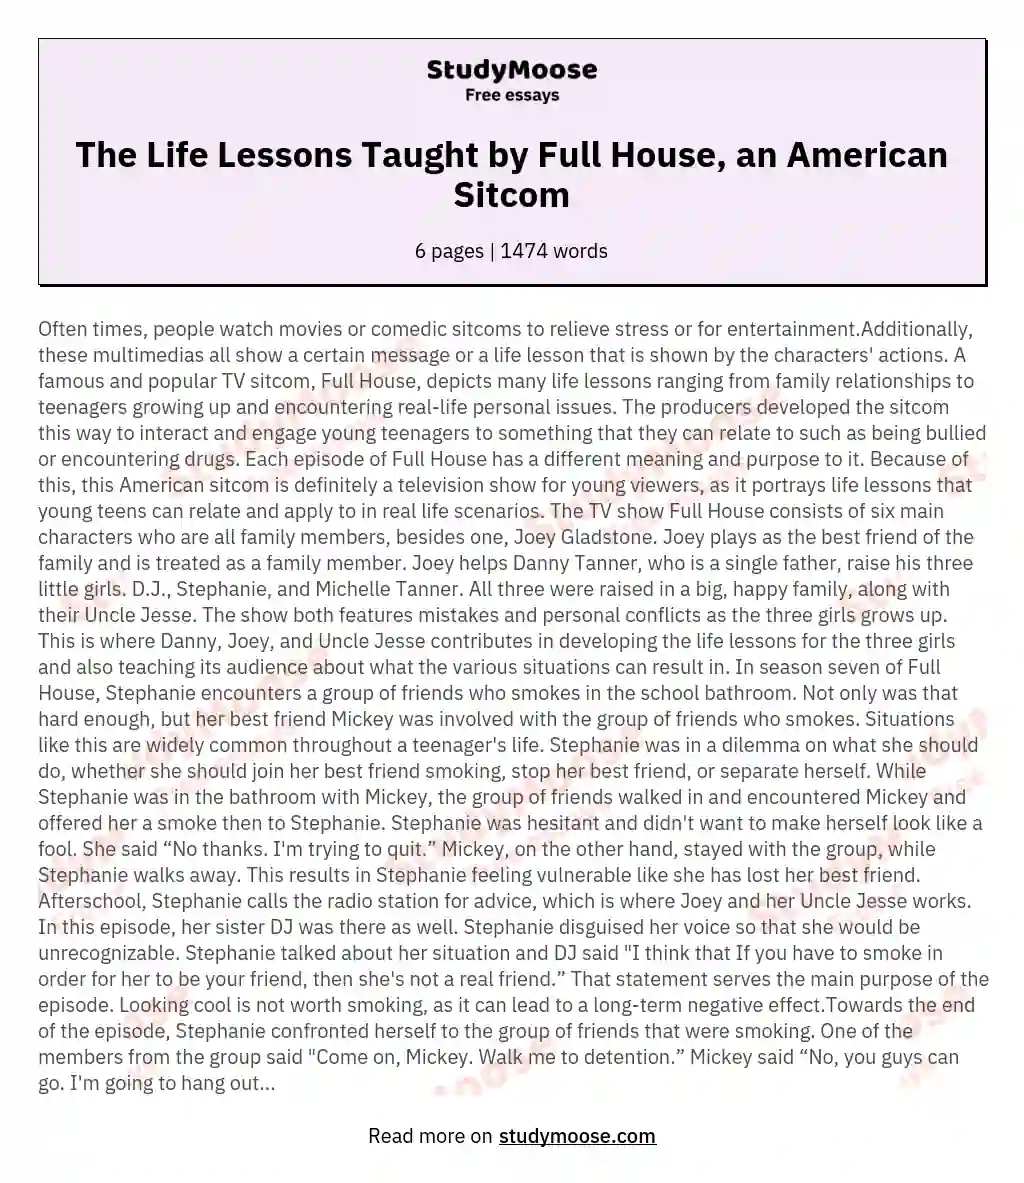 The Life Lessons Taught by Full House, an American Sitcom essay